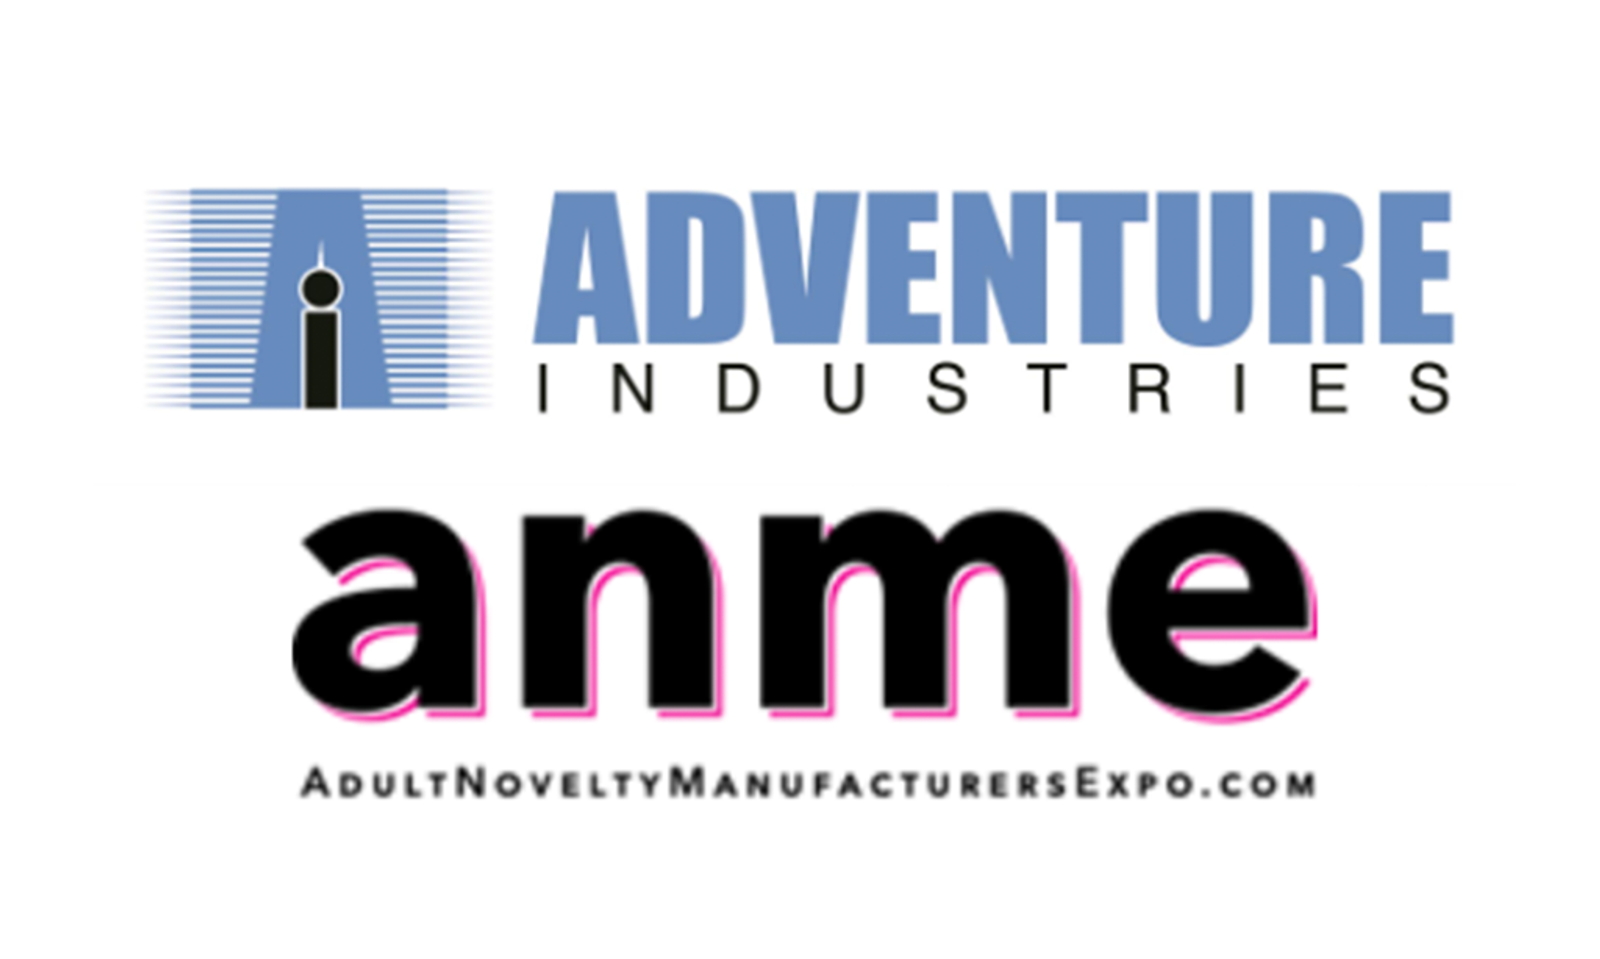 Adventure Industries To Exhibit CBD Products at 2019 ANME